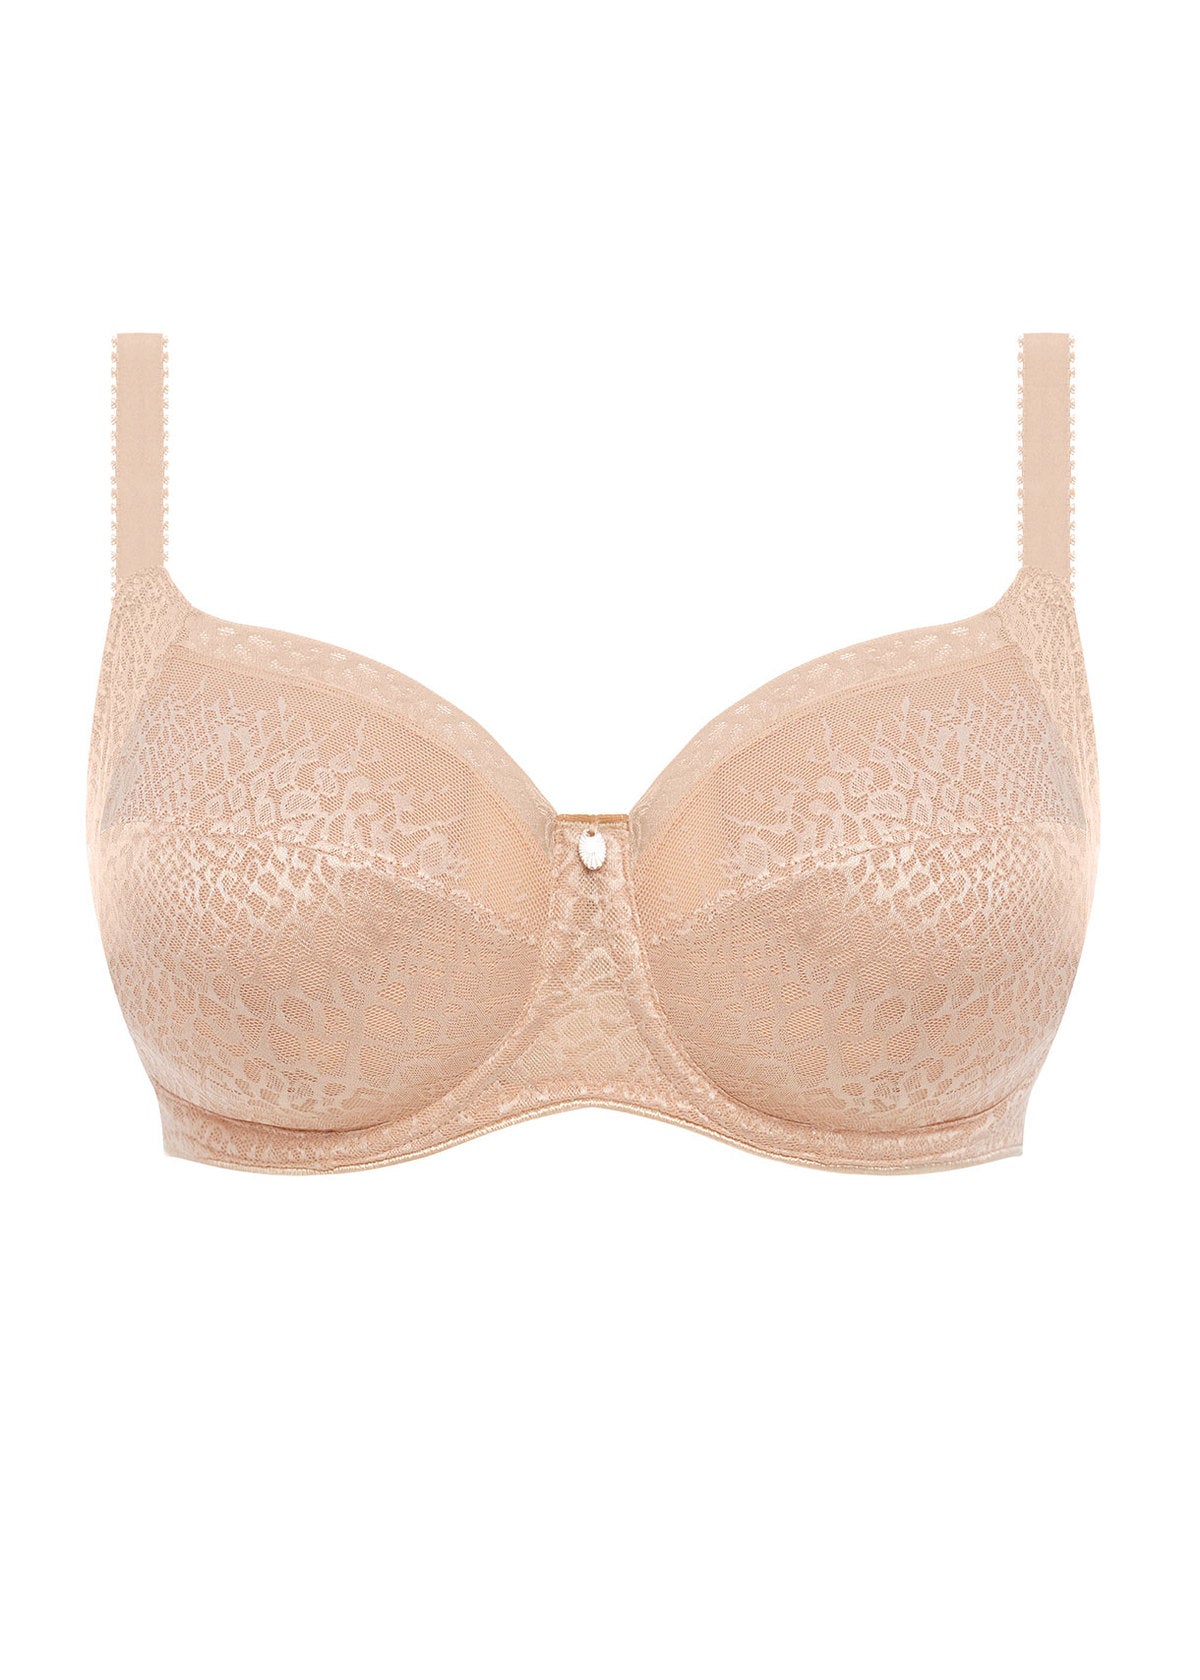 Envisage Full Cup Side Support Bra In Natural Beige - Fantasie – BraTopia